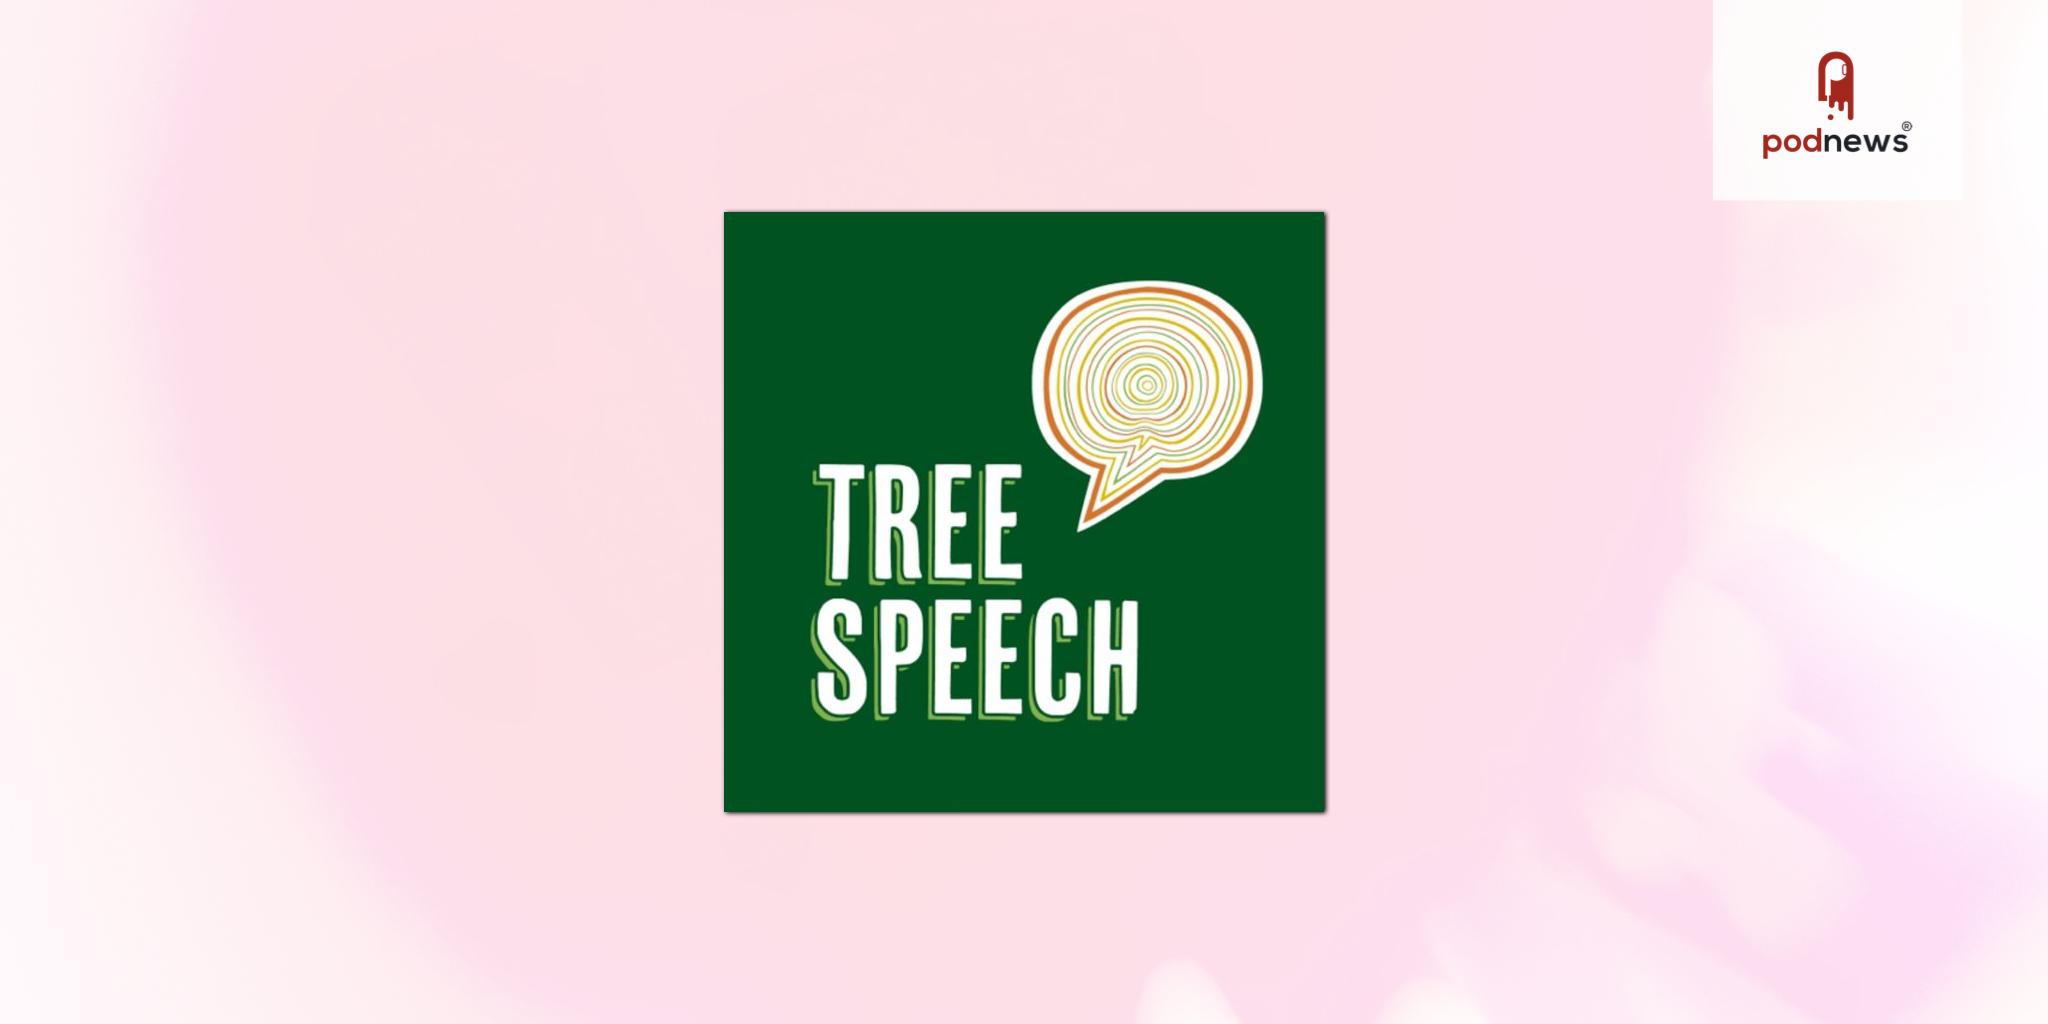 Tree Speech Podcast focuses on intersection of reproductive rights, human rights and climate solutions